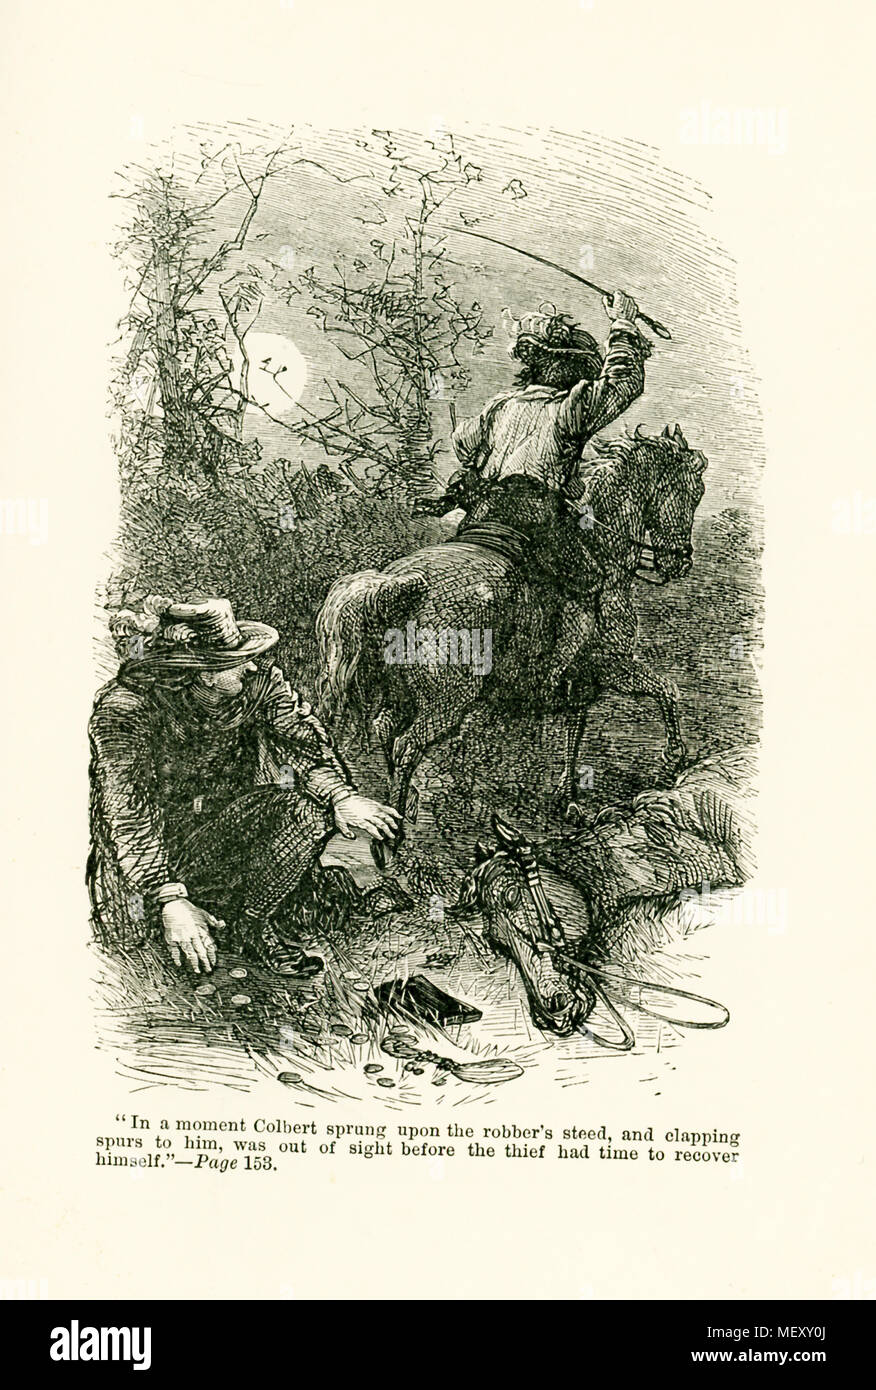 The caption for this illustration that dates to around 1865 reads: In a moment Colbert sprung upon the robber's steed, and clapping spurs to him, was out of sight before the thief had time to recover himself. Jean Baptiste Colbert was the comptroller (minister) of finance from 1665 and secretary of the navy form 1668 under King Louis XIV of France. It was said at age 15, when working for his father, he took a short way home, and was held up by a robber. Resourcefully, he threw some coins on the ground and got off his horse. The robber went ot collect the coins, Colbert mounted the steed and to Stock Photo